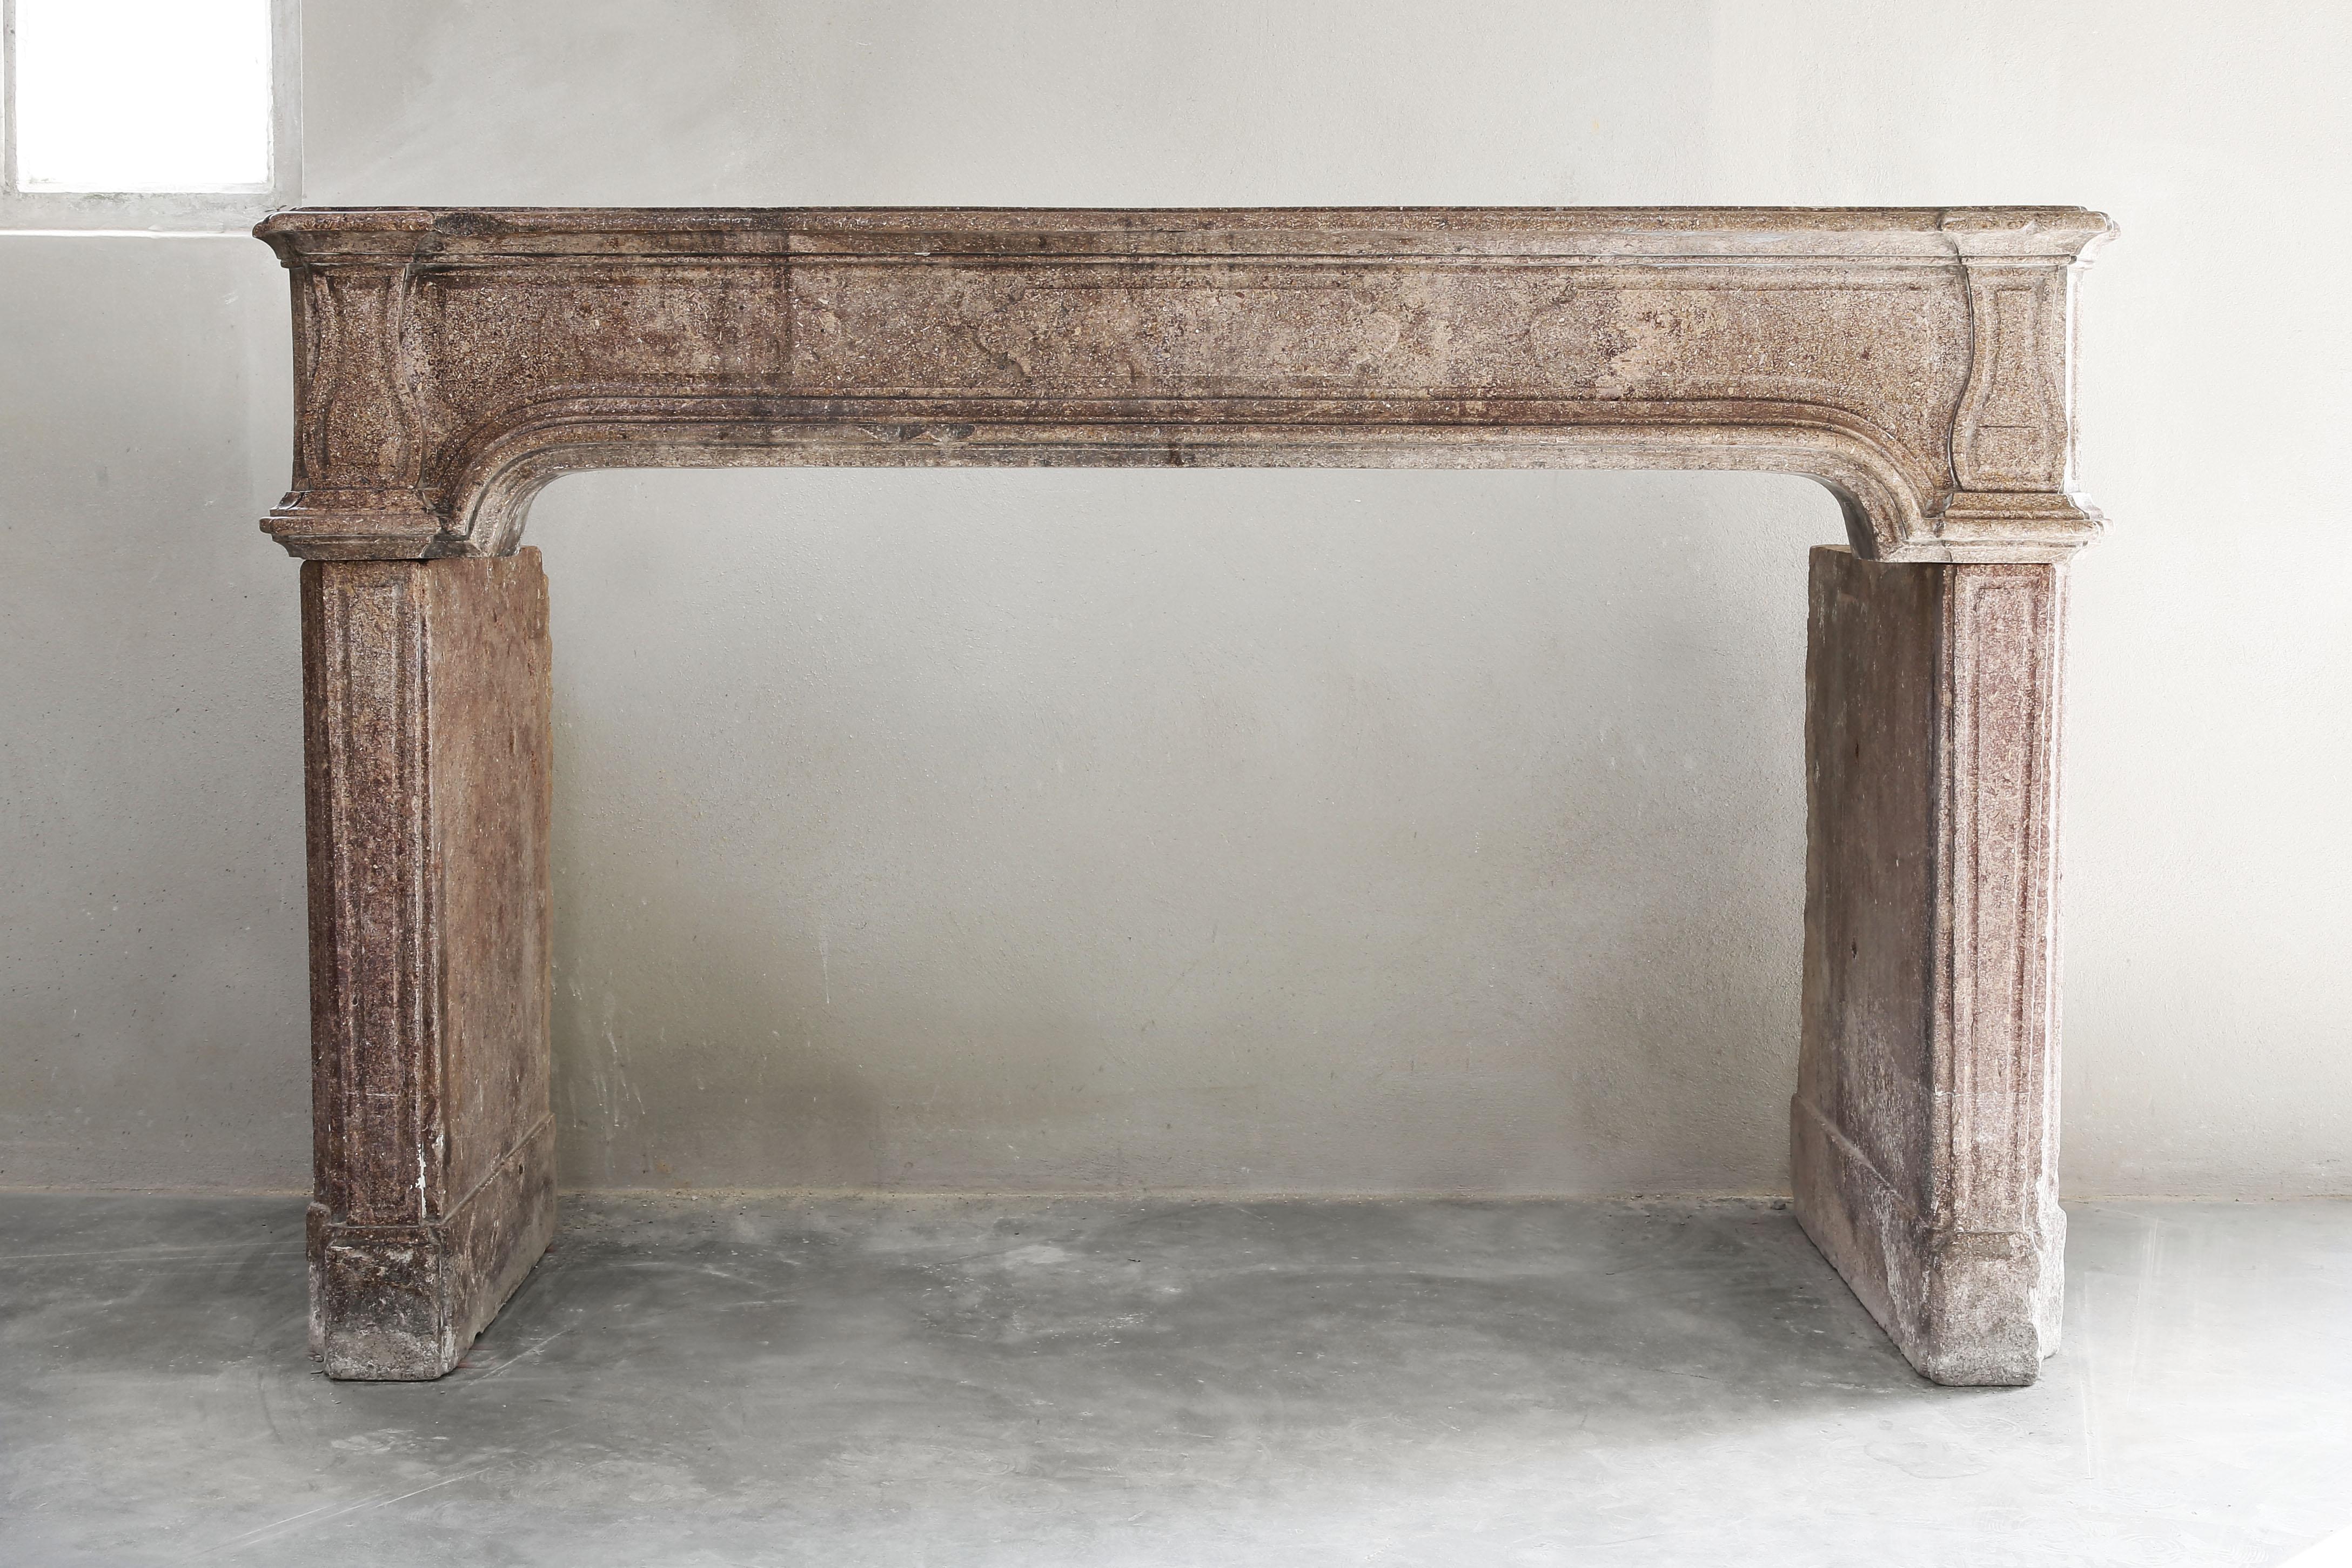 Beautiful French antique marble stone fireplace from the 19th century, time of Louis XIV. This fireplace has beautiful curves and lines and a warm color scheme. The color is a melange of brown/beige. The legs are straight and in the middle of the